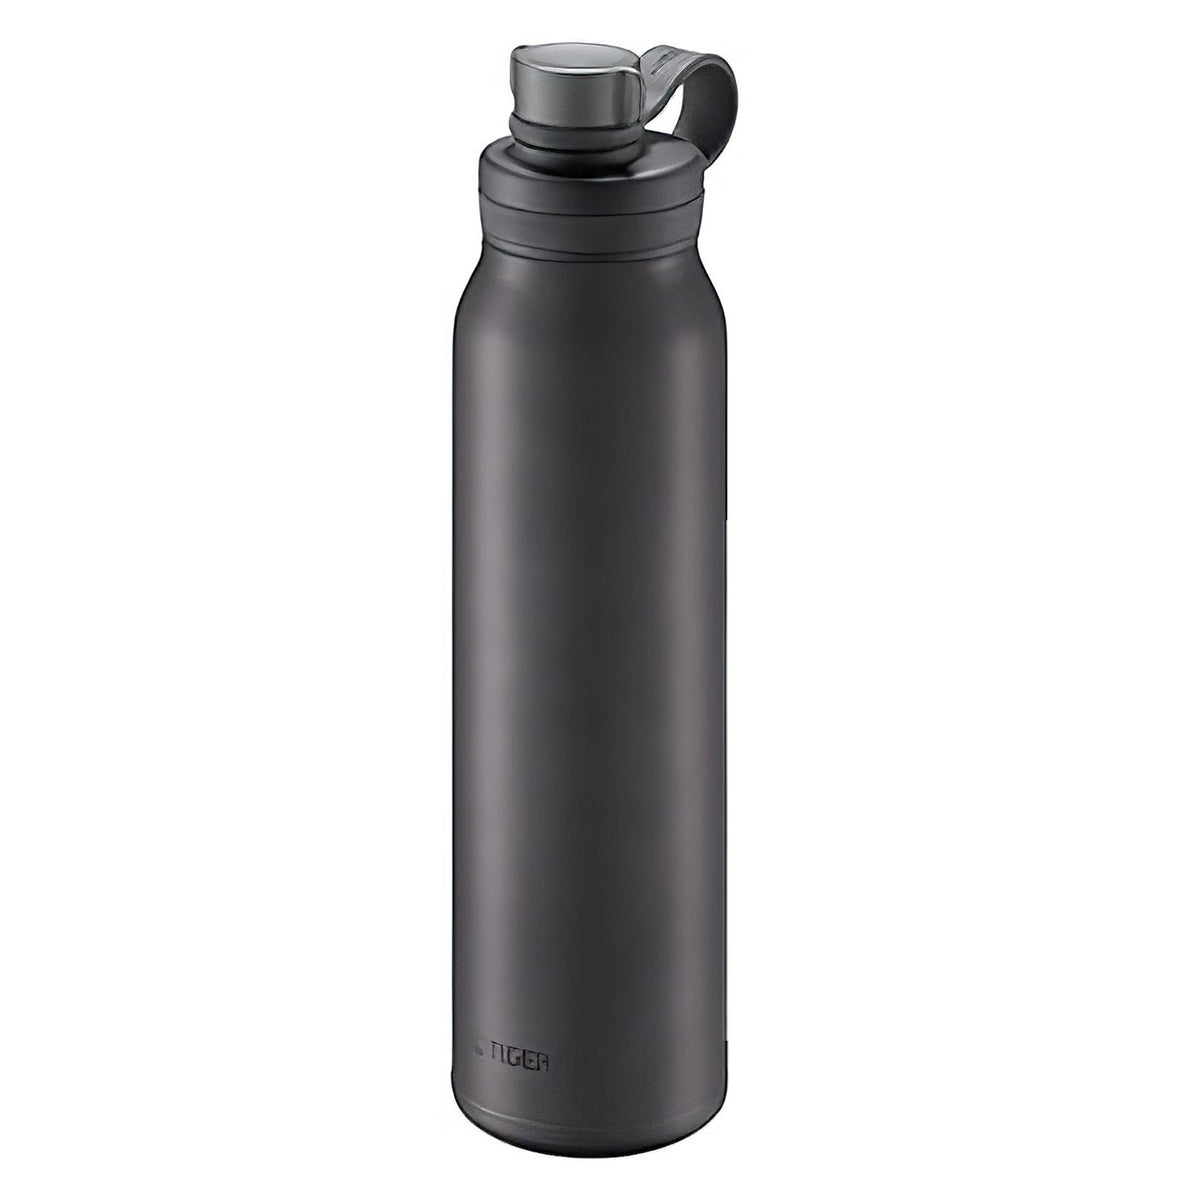 TIGER Stainless Steel Water Bottle